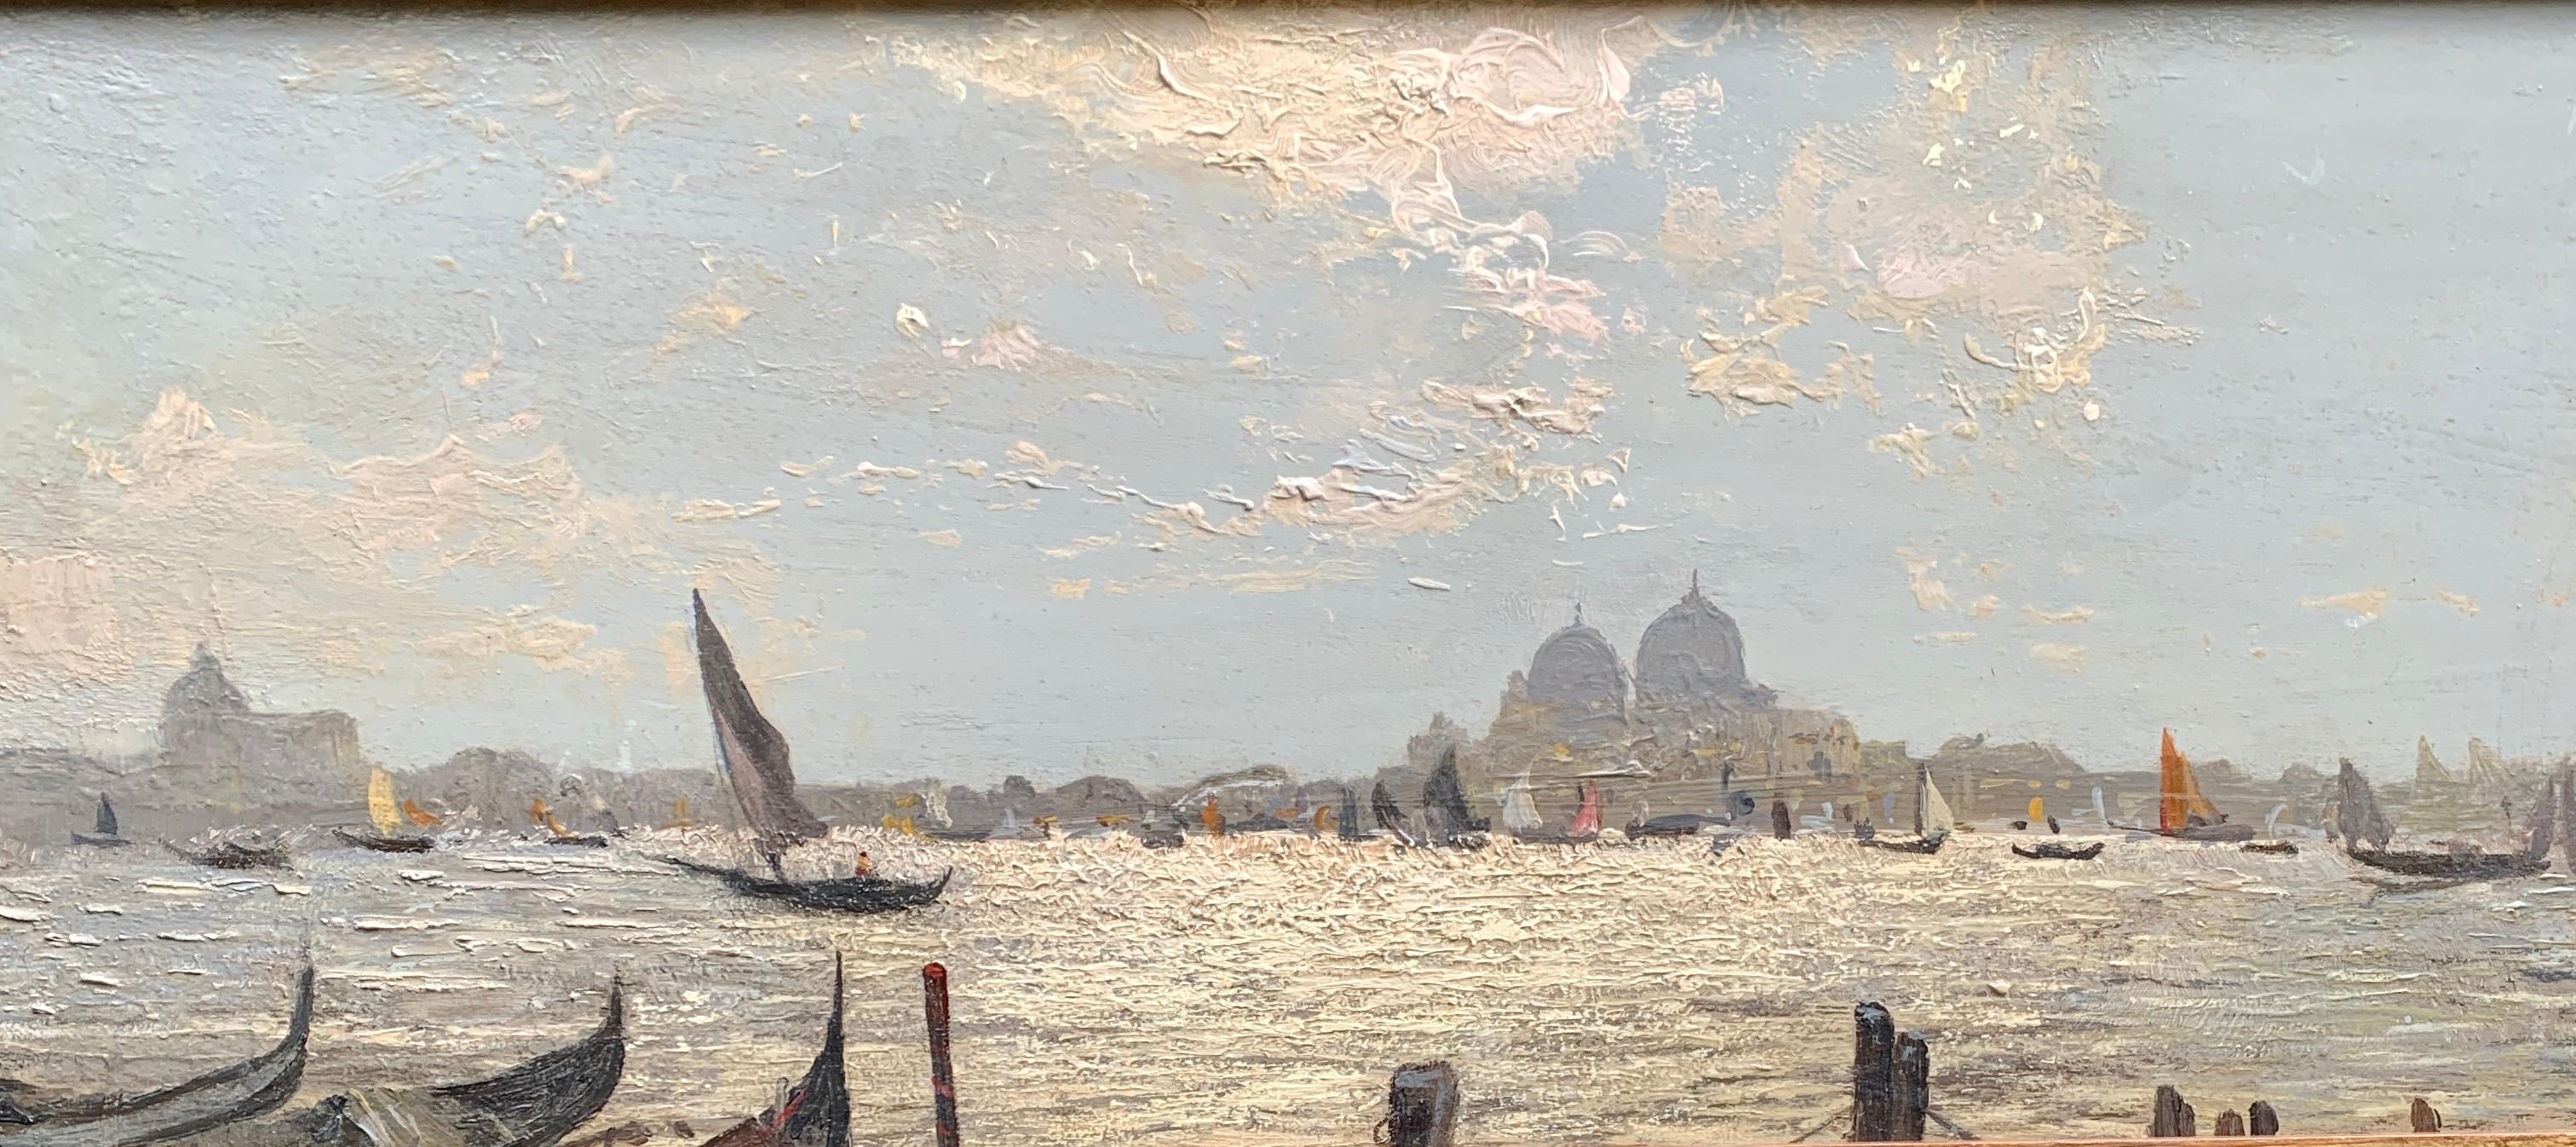 Impressionist view of Venice from the sea or Canal, with boats and gondolas - Painting by Mario Rosario Allegretti